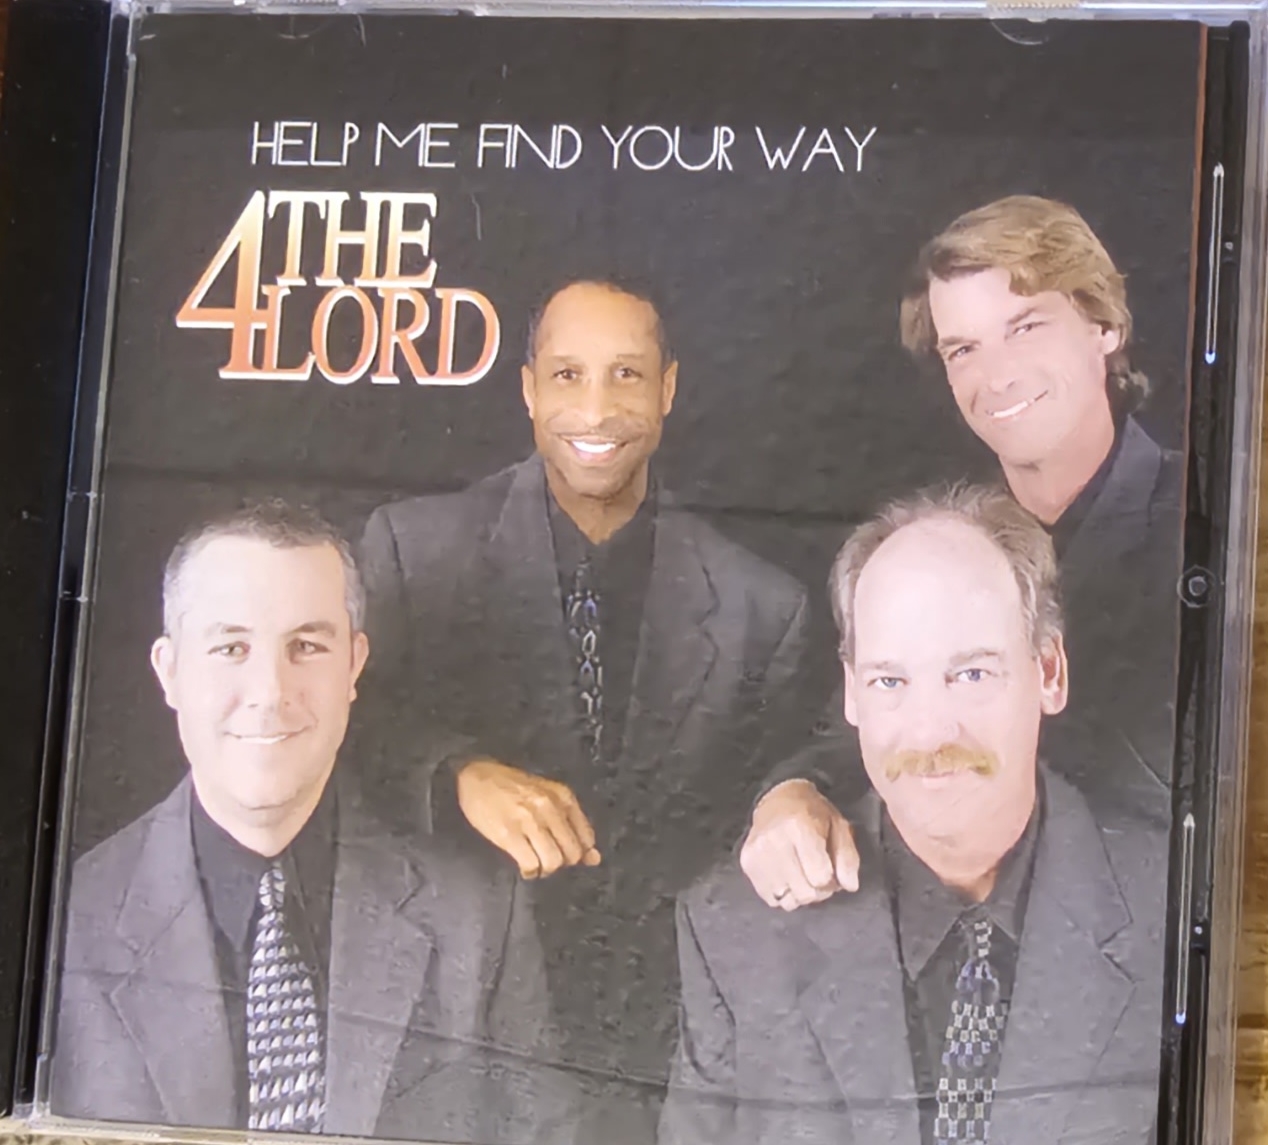 Art for Just A Closer Walk With Thee by 4 The Lord